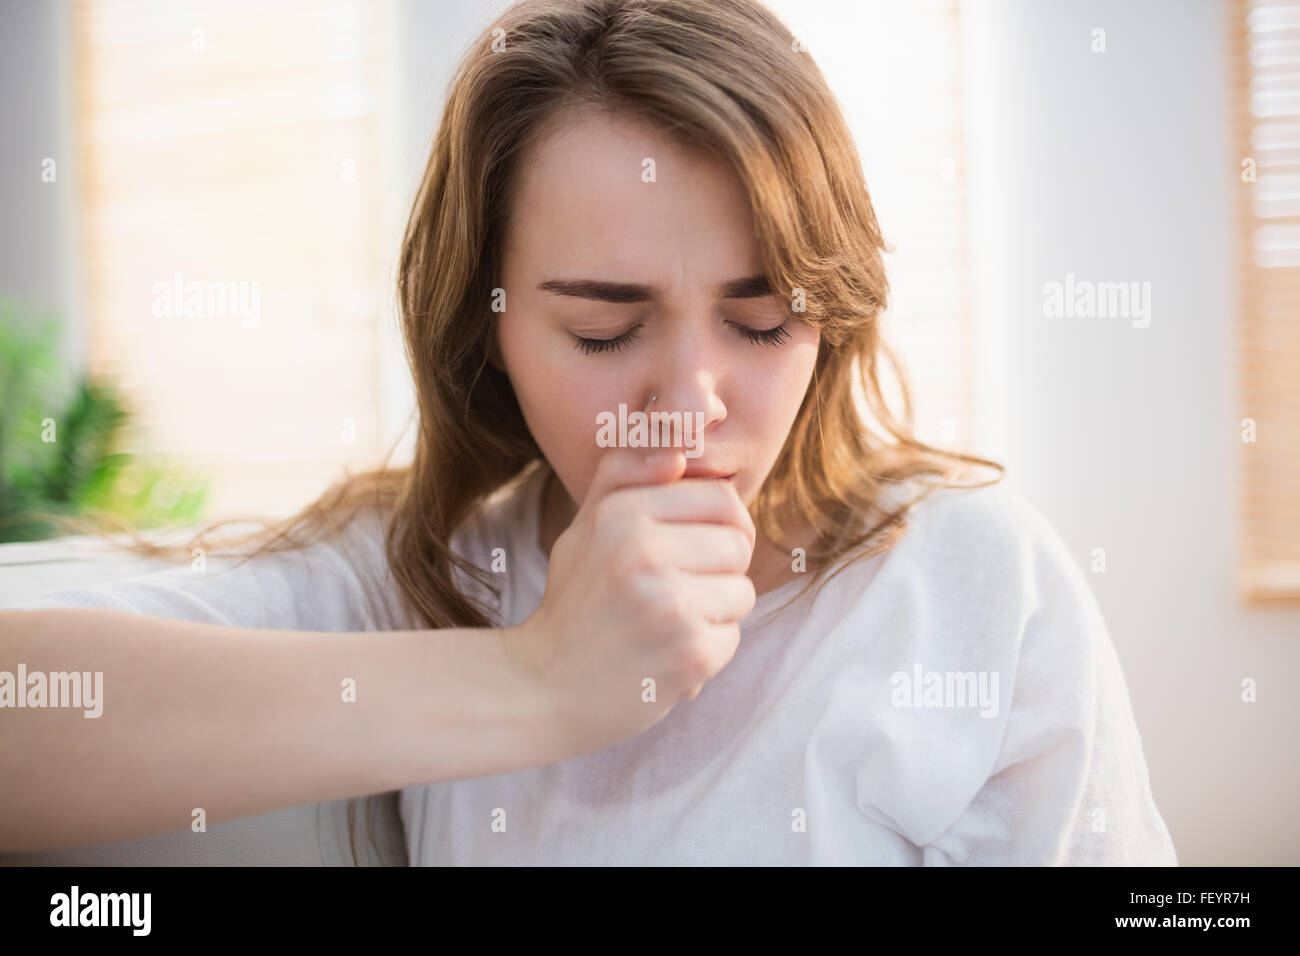 Pretty woman coughing Stock Photo